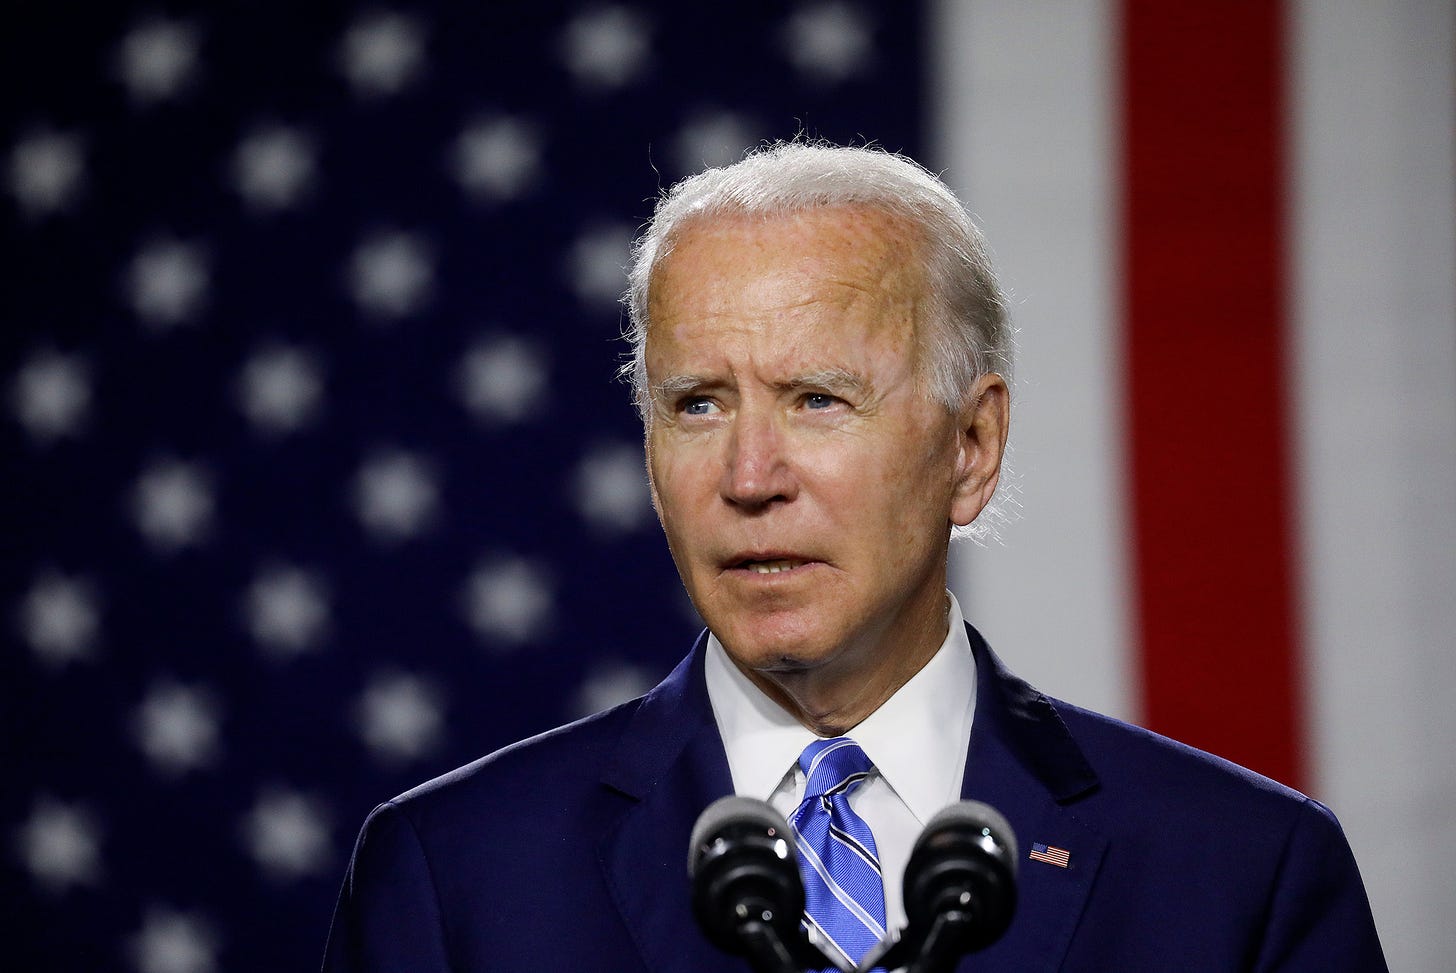 Joe Biden&#39;s vice presidential pick will be deeply consequential. That is  far from the norm.